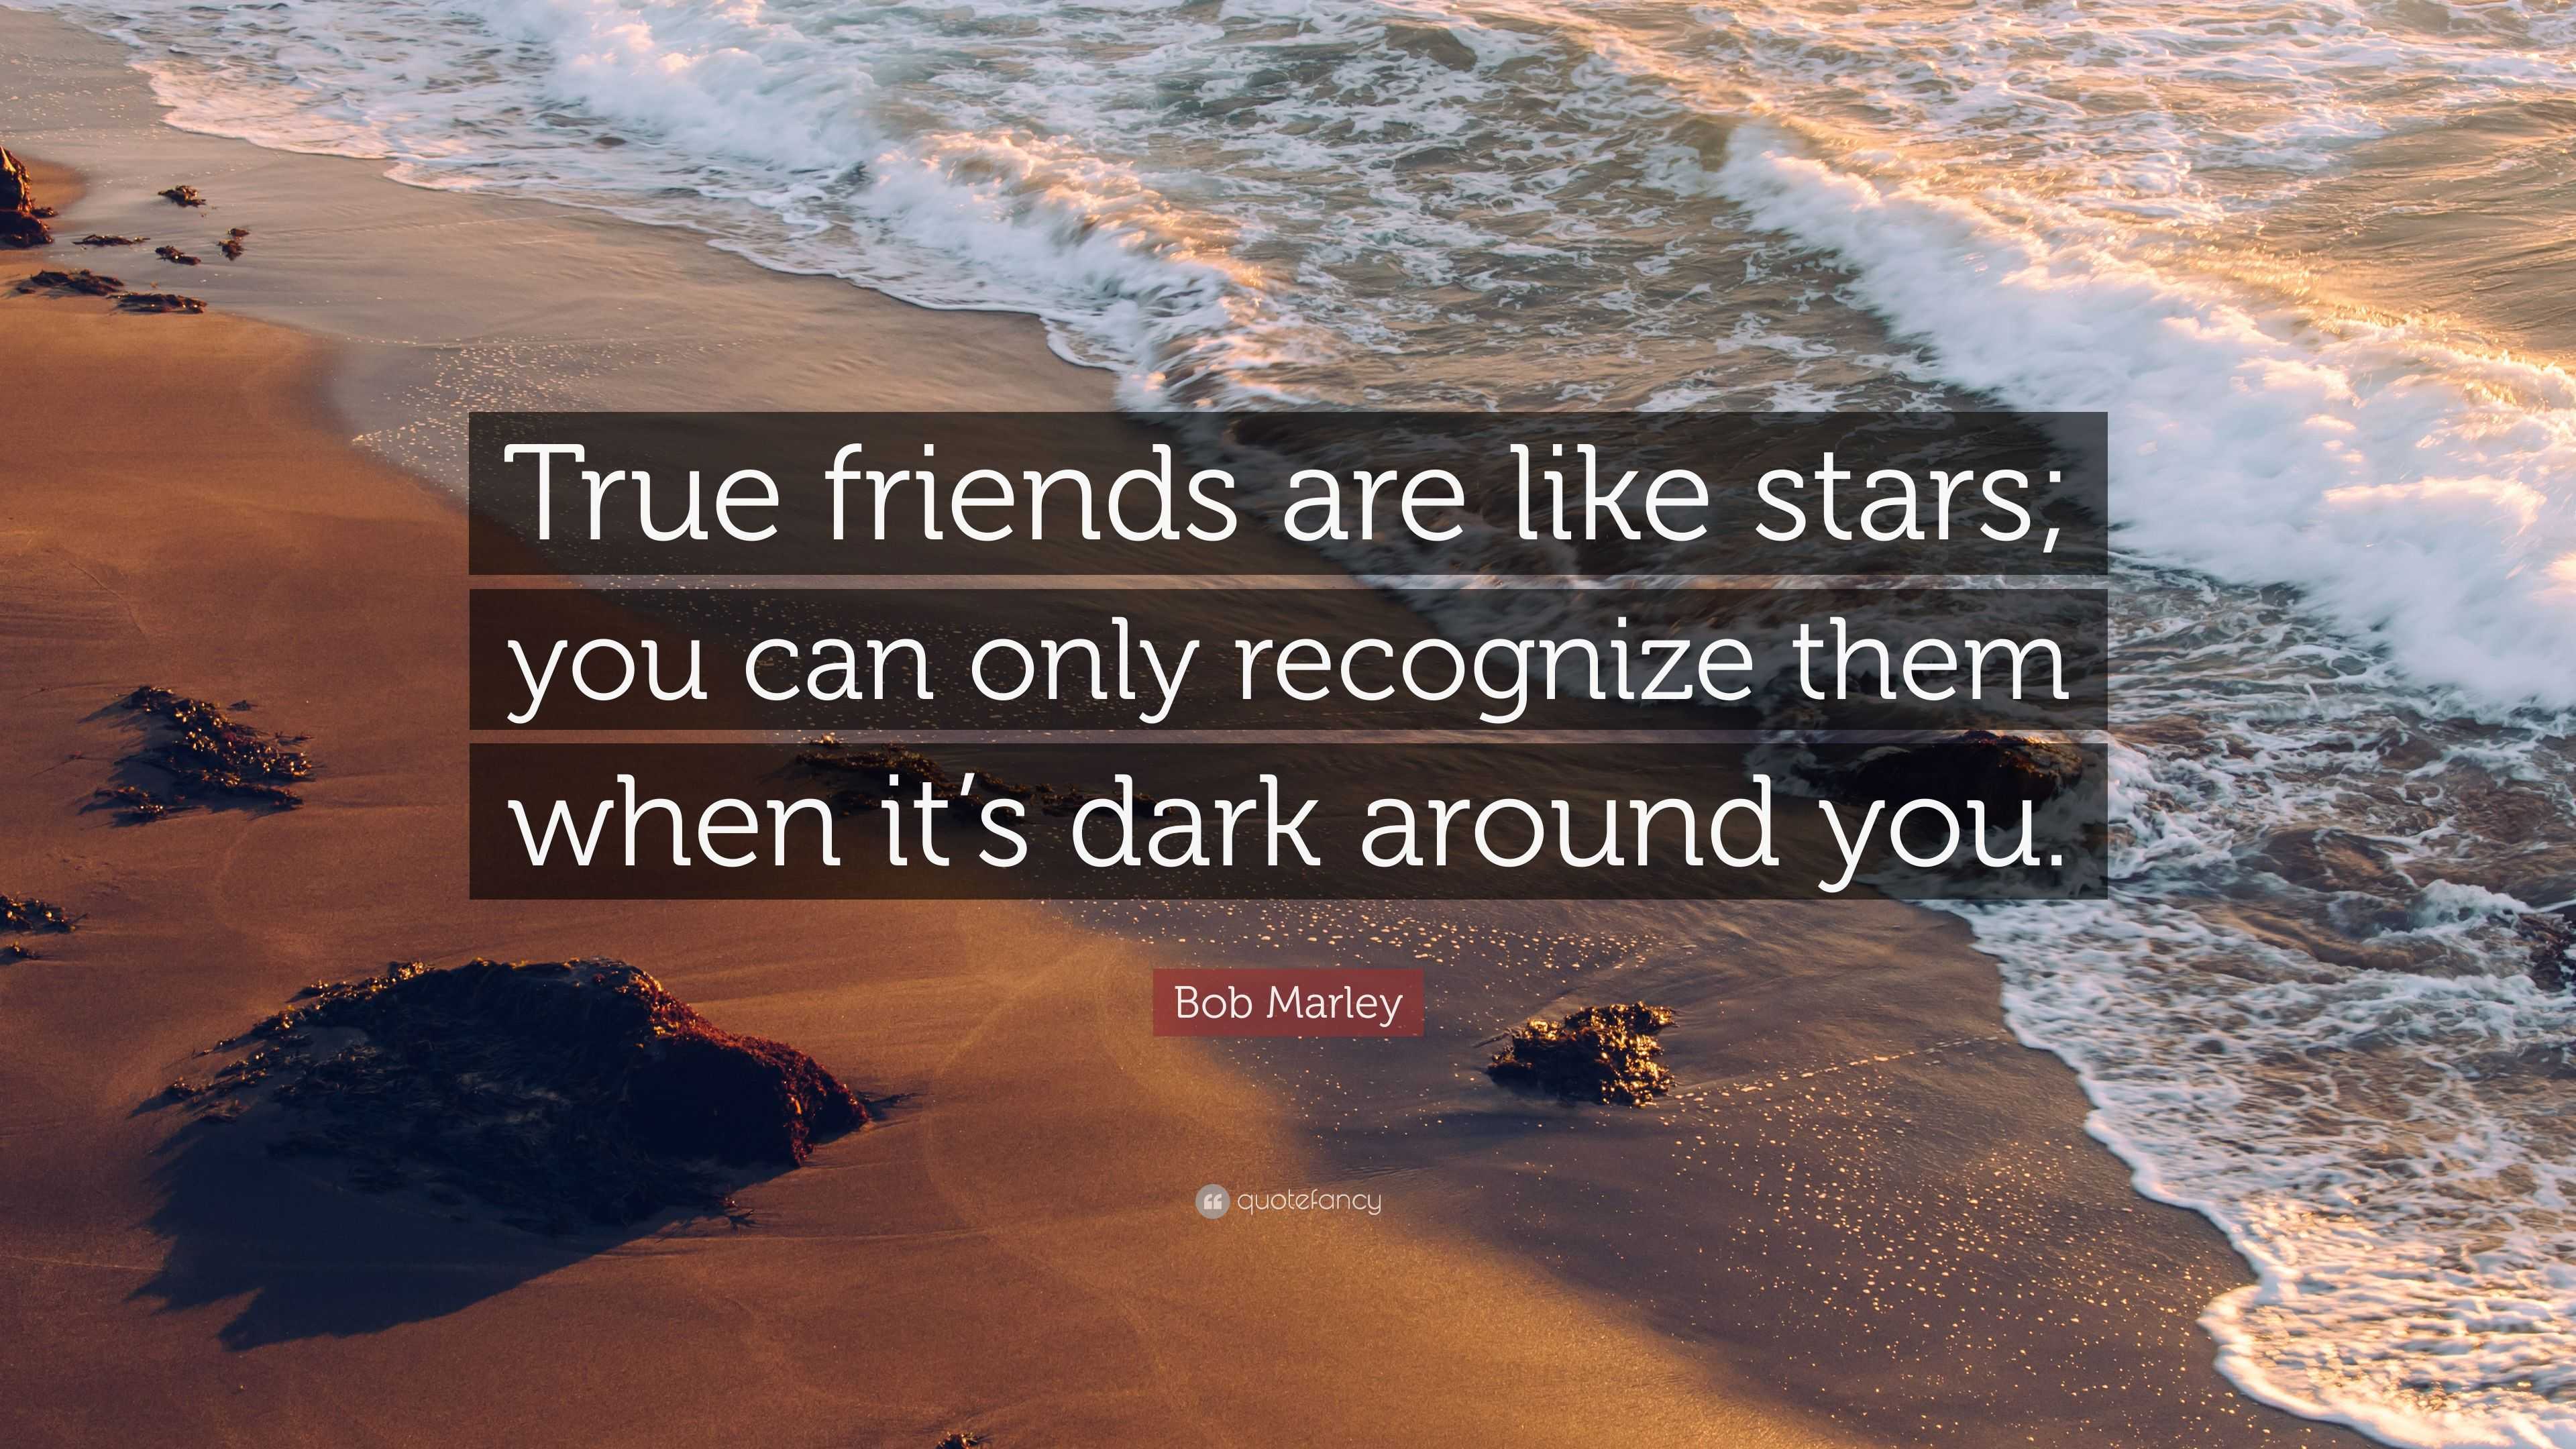 Bob Marley Quote True Friends Are Like Stars You Can Only Recognize Them When It S Dark